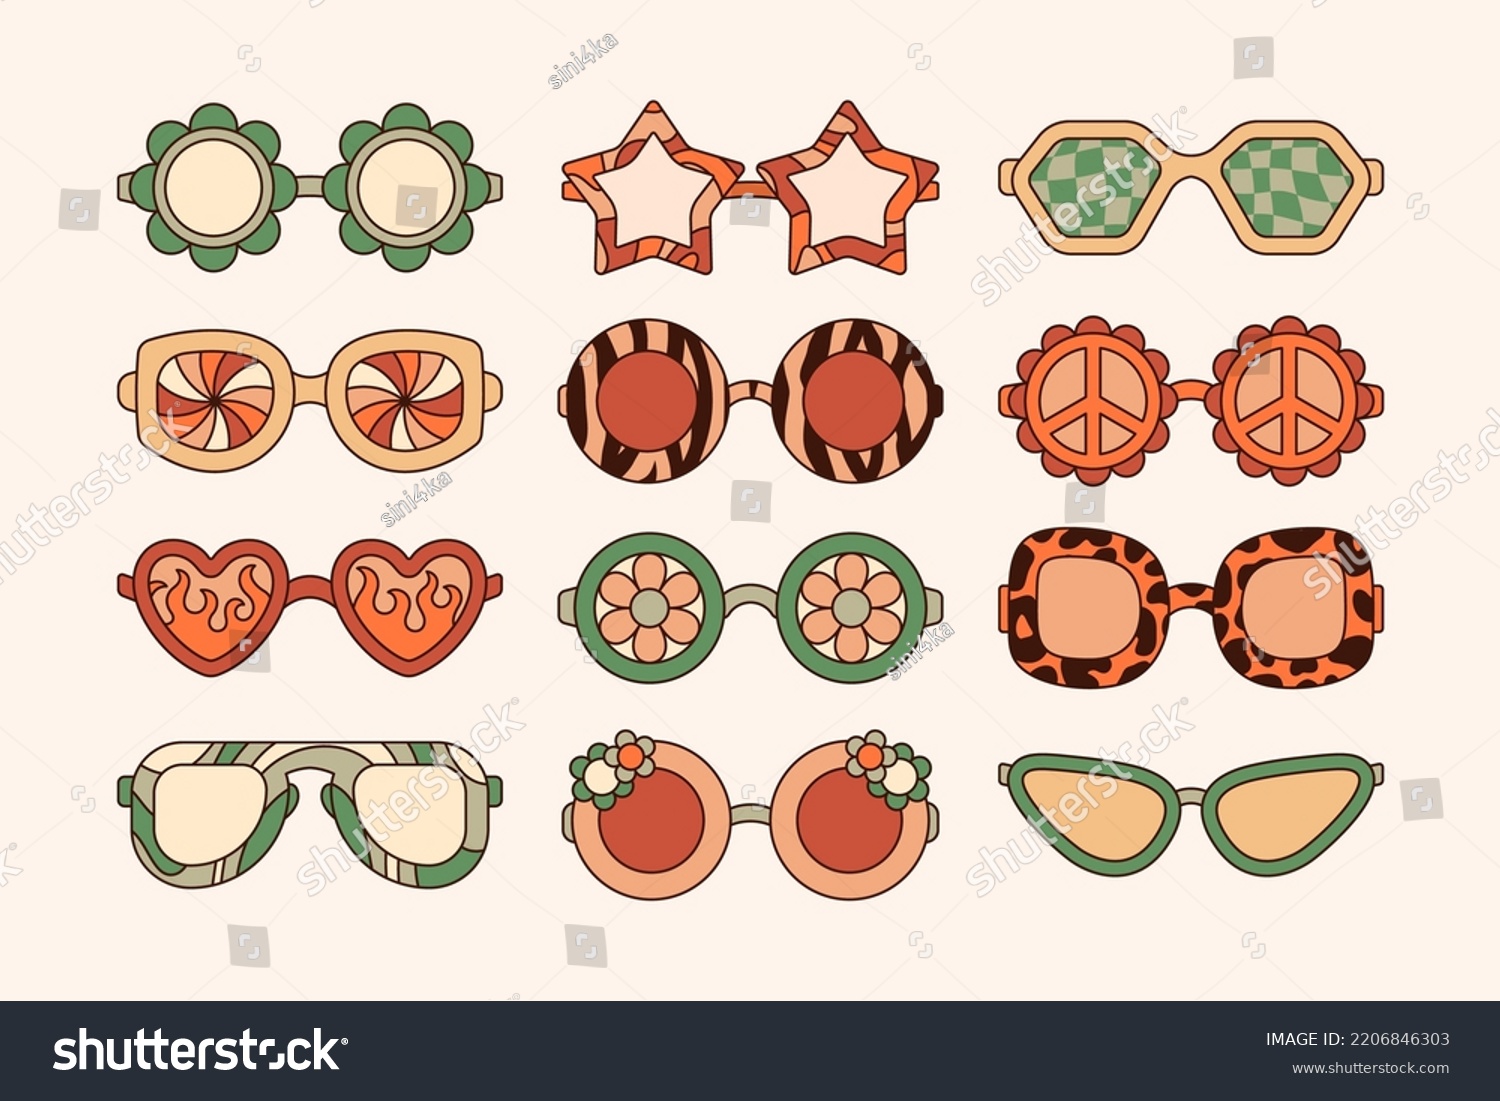 Groovy Sunglasses Set in Retro Hippie Style . Geometric Abstract Vector Eyewear in 1970s in Different Forms: Heart, Peace Symbol, Stars, Daisy Flowers for Print on T-Shirts, Cards, Creating Logo #2206846303